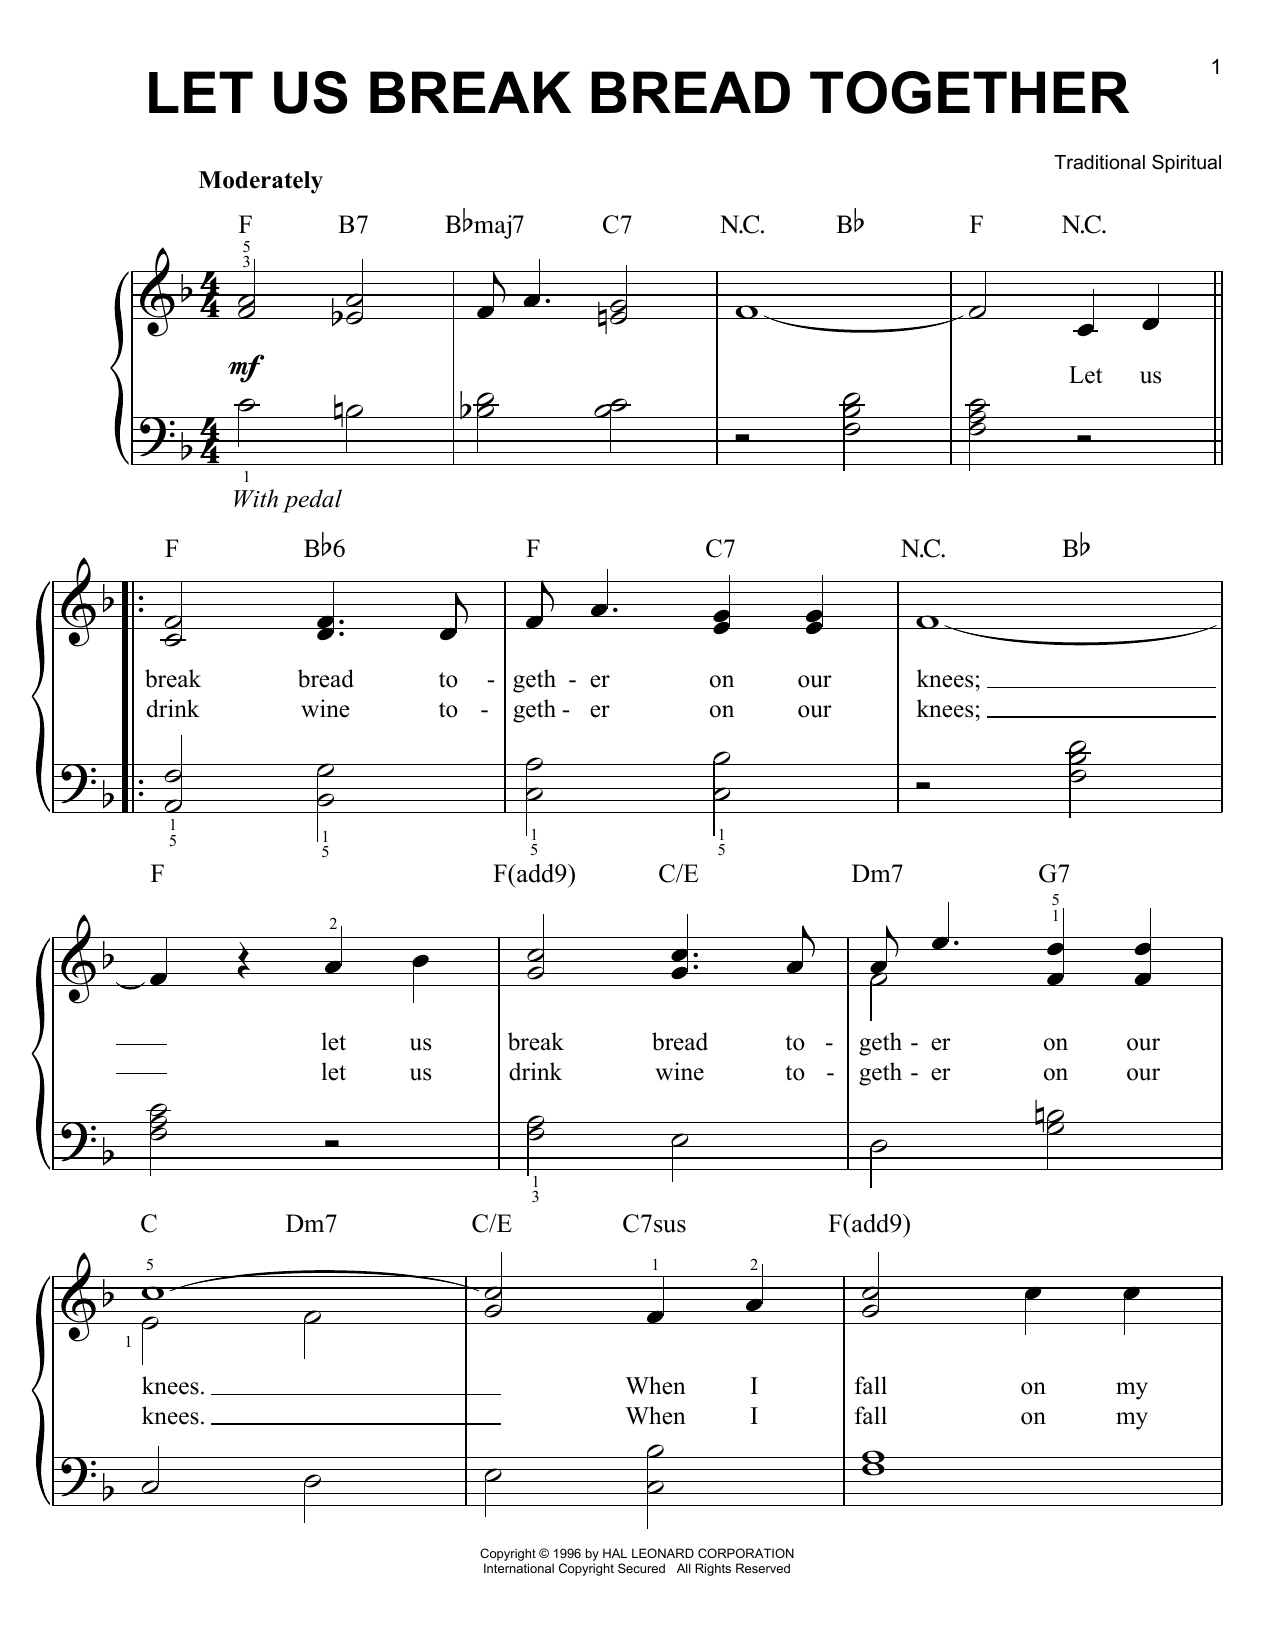 Download Traditional Spiritual Let Us Break Bread Together Sheet Music